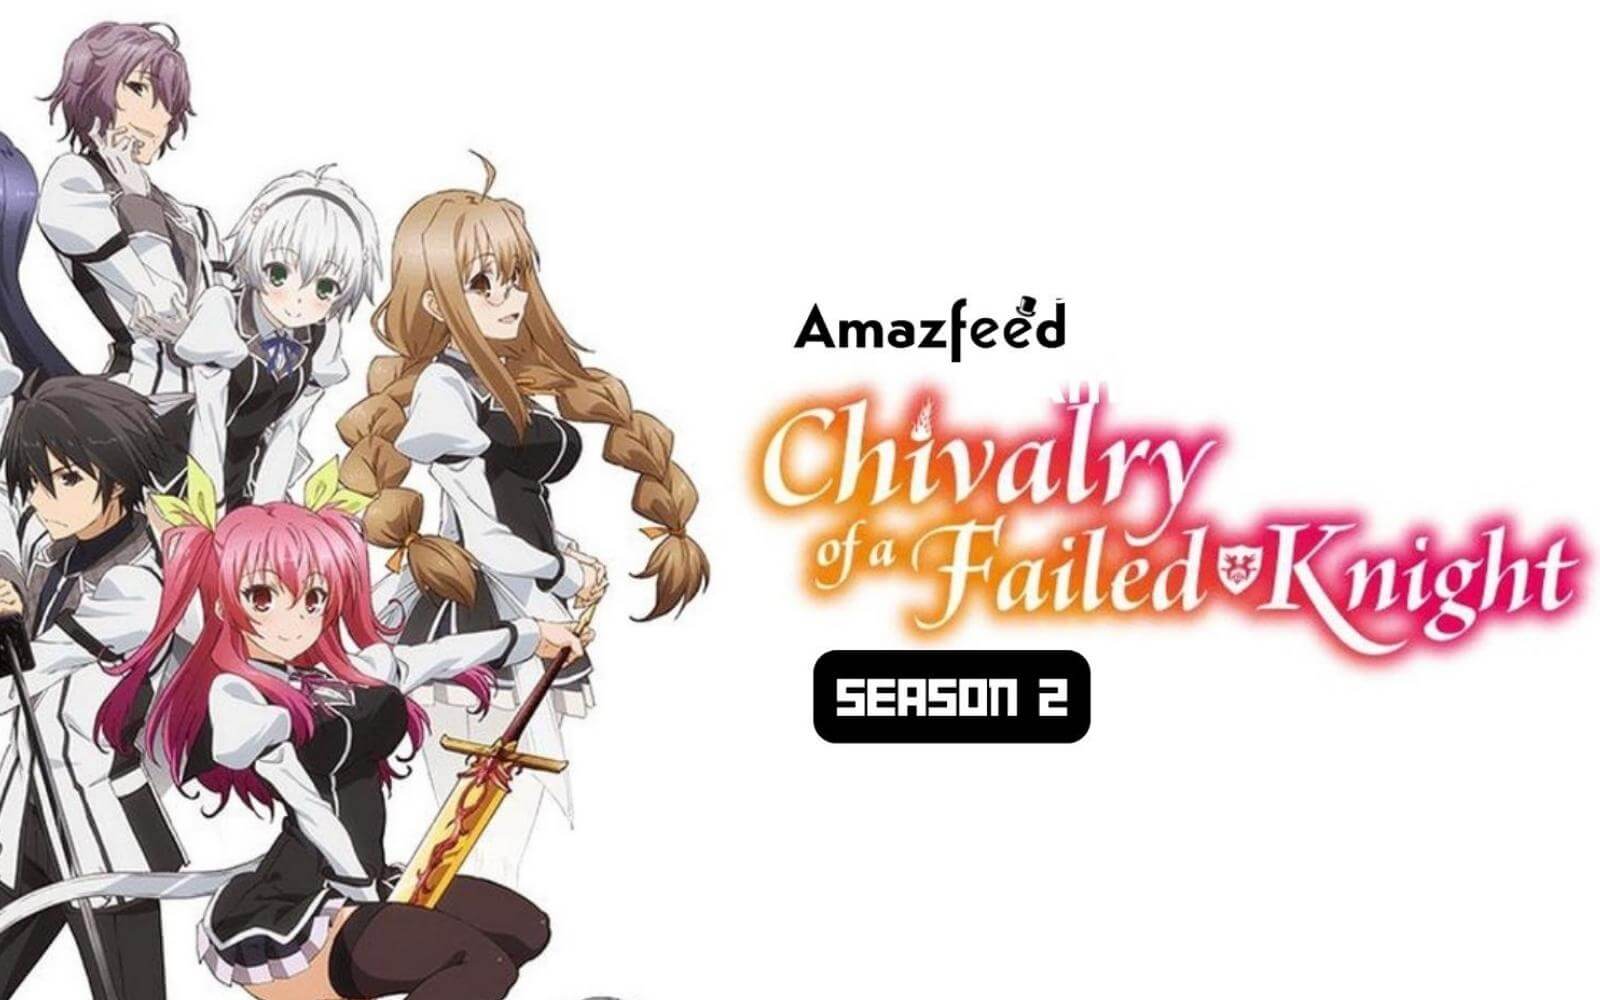 Chivalry Of A Failed Knight Season 2 Release Date, Trailer, Cast, Expectation